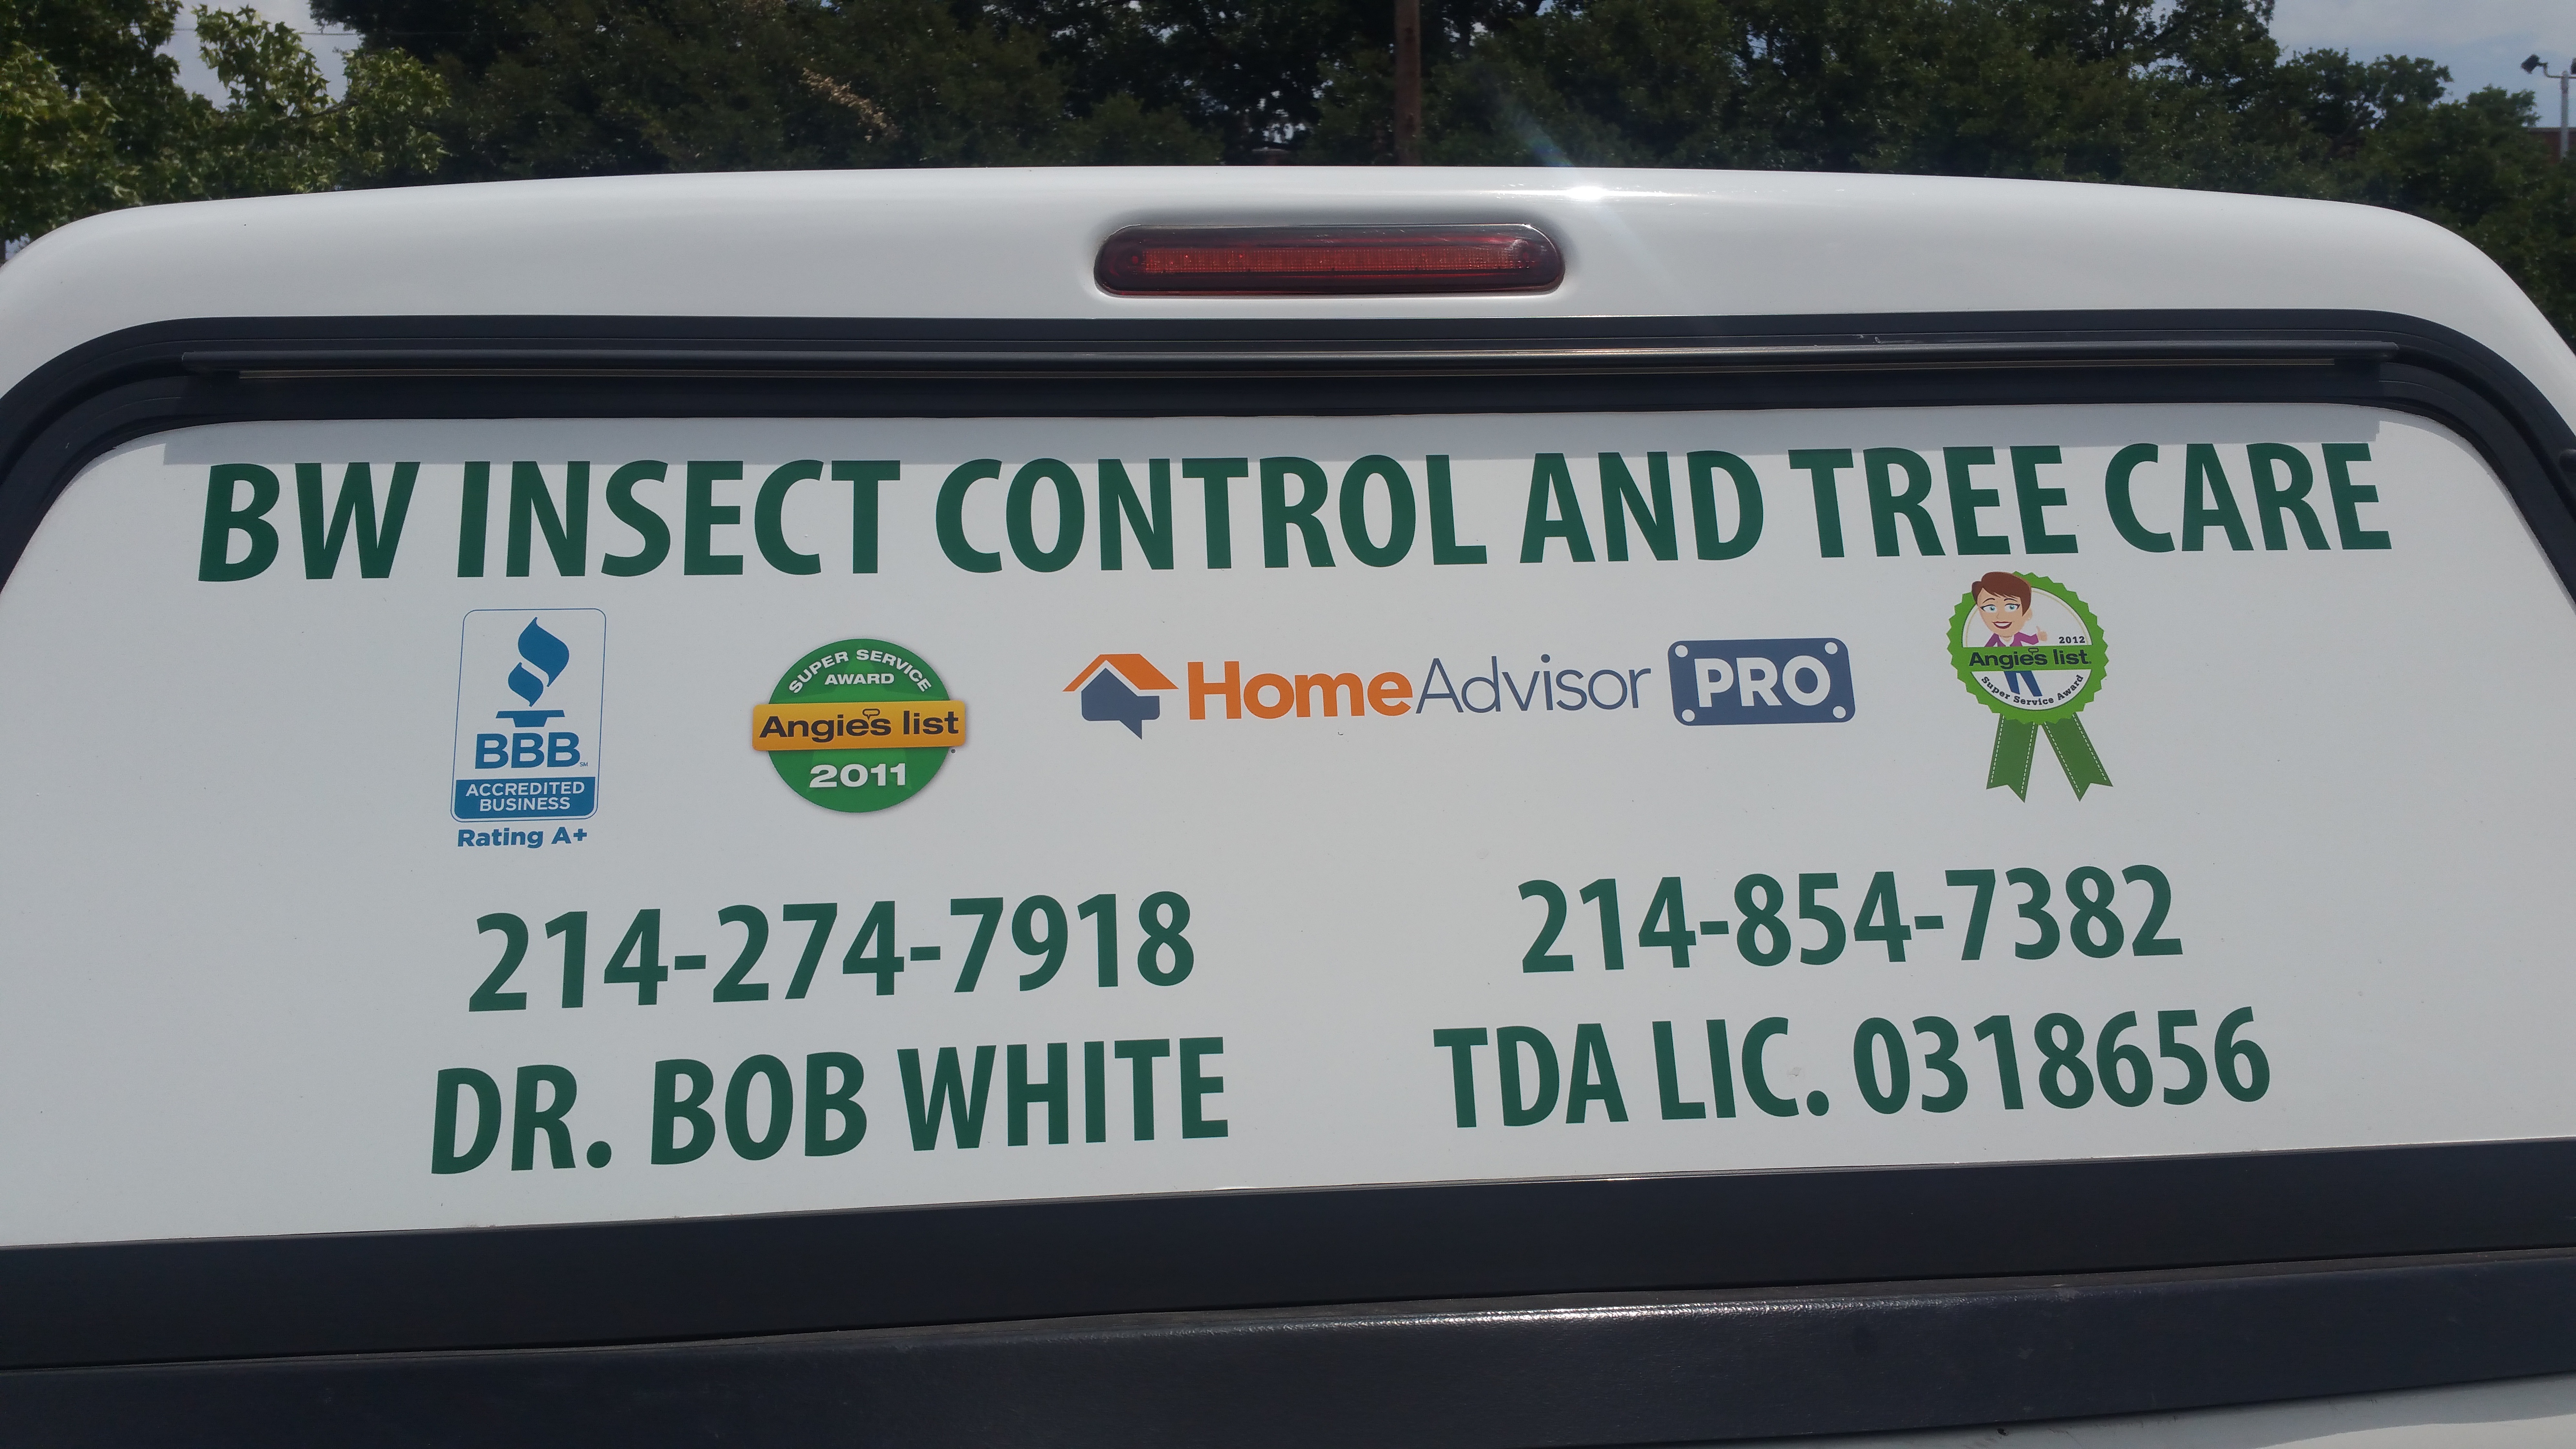 BW Insect Control and Tree Care Logo